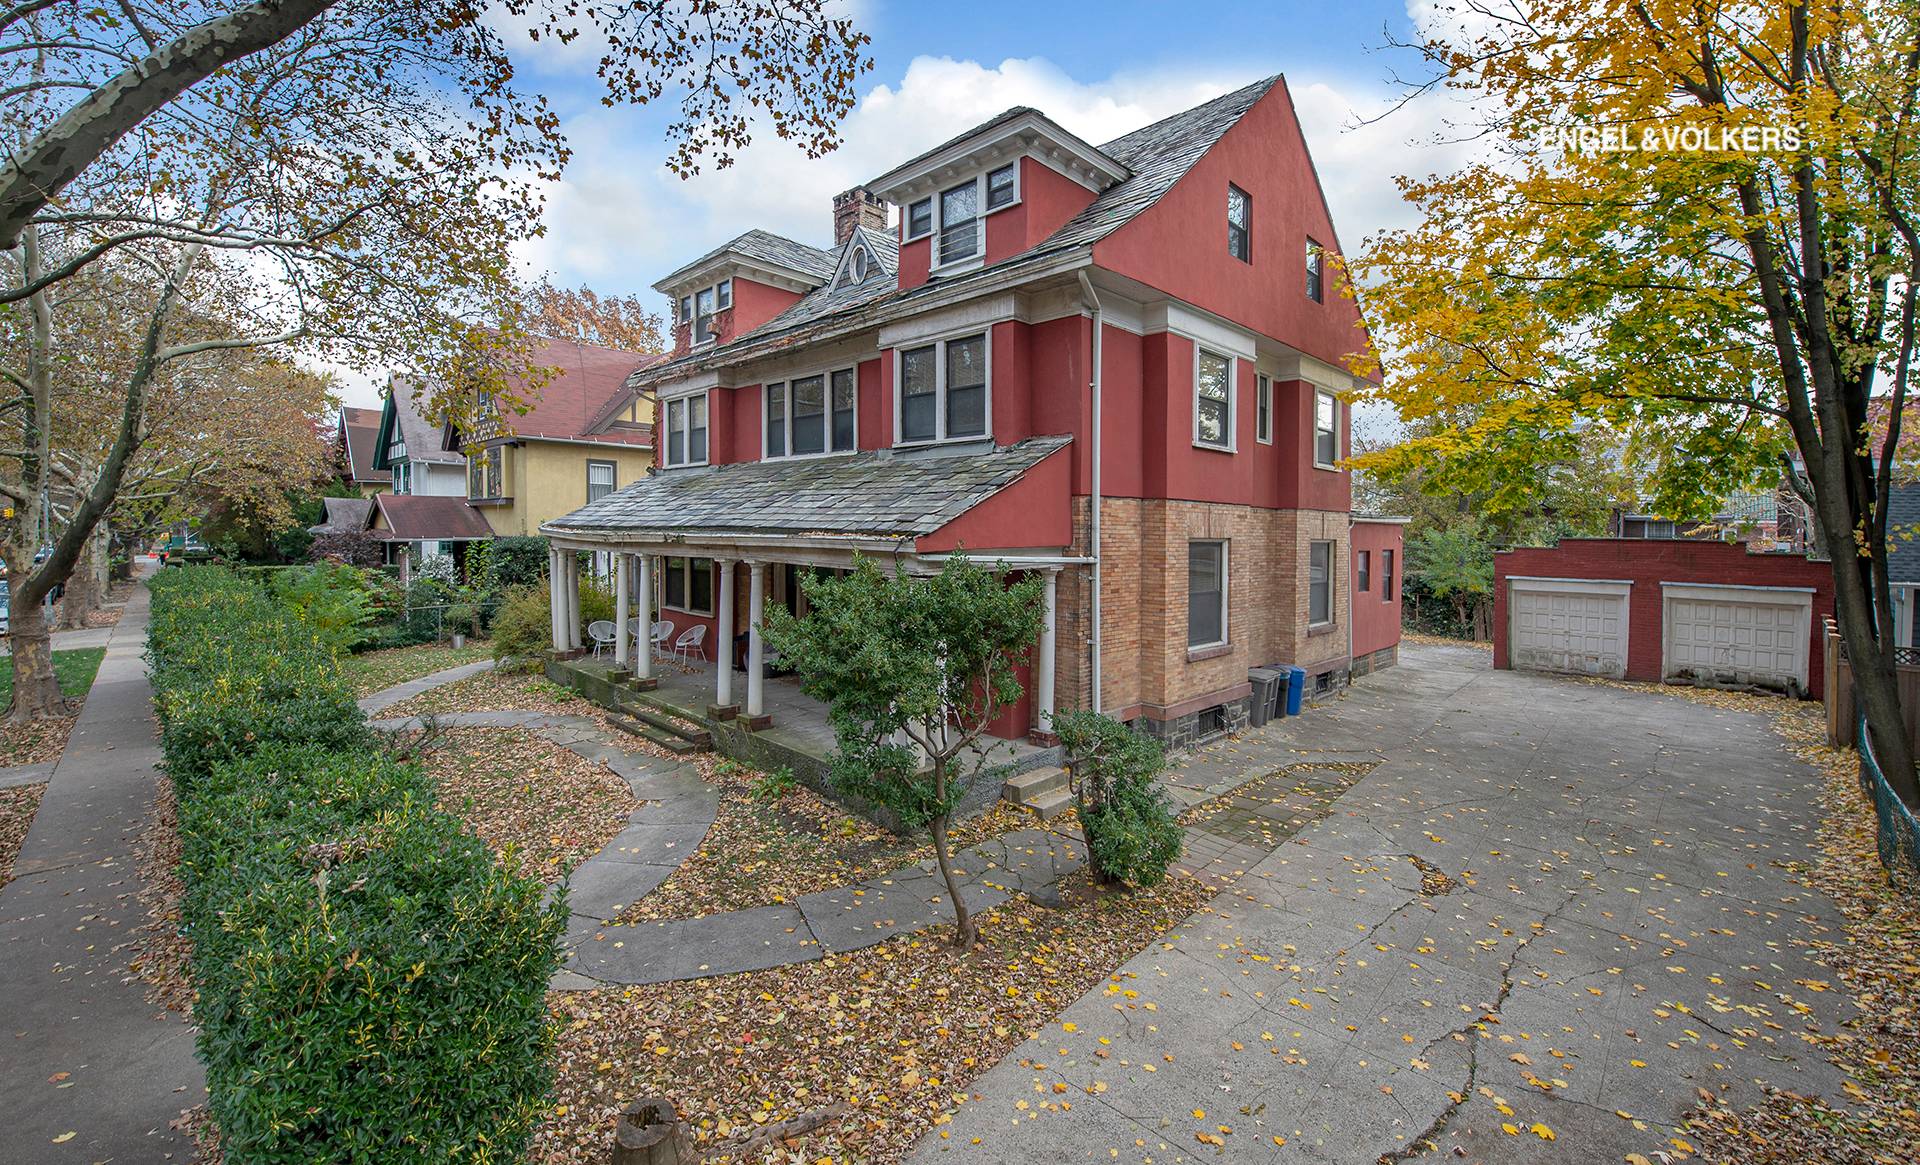 One of the largest homes in all of Prospect Lefferts sitting on a 100 ft x 105 ft lot, this Victorian features seven bedrooms, five baths, dining room and 2 ...